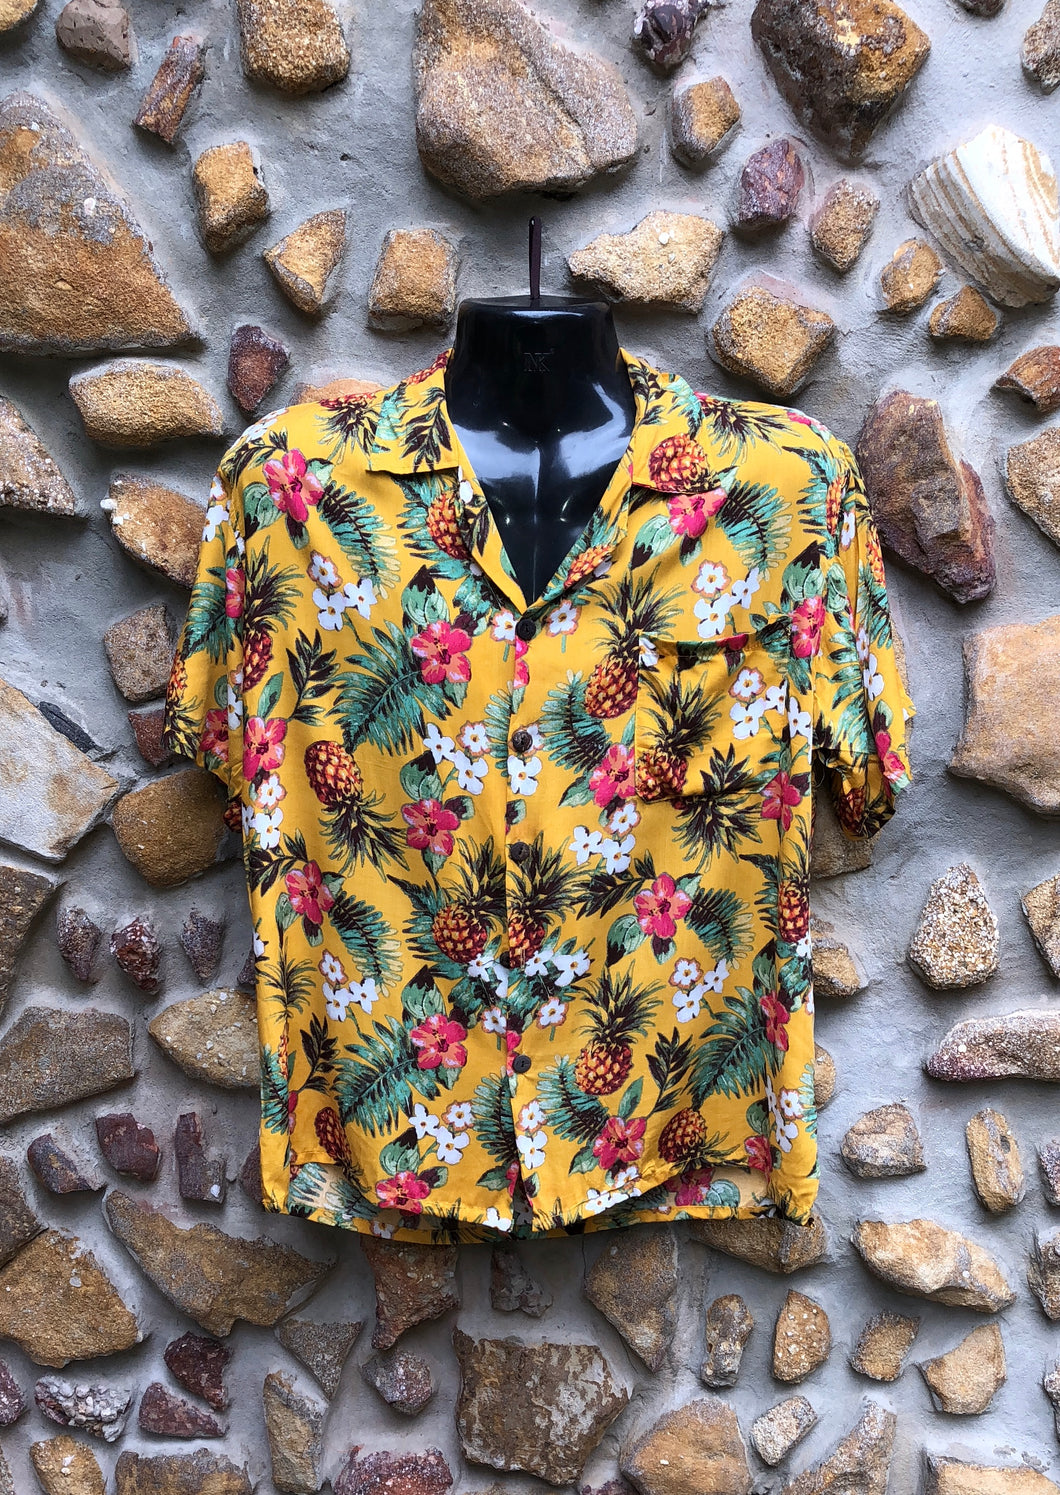 Small Love Shirt - Pineapples and Flowers on Yellow